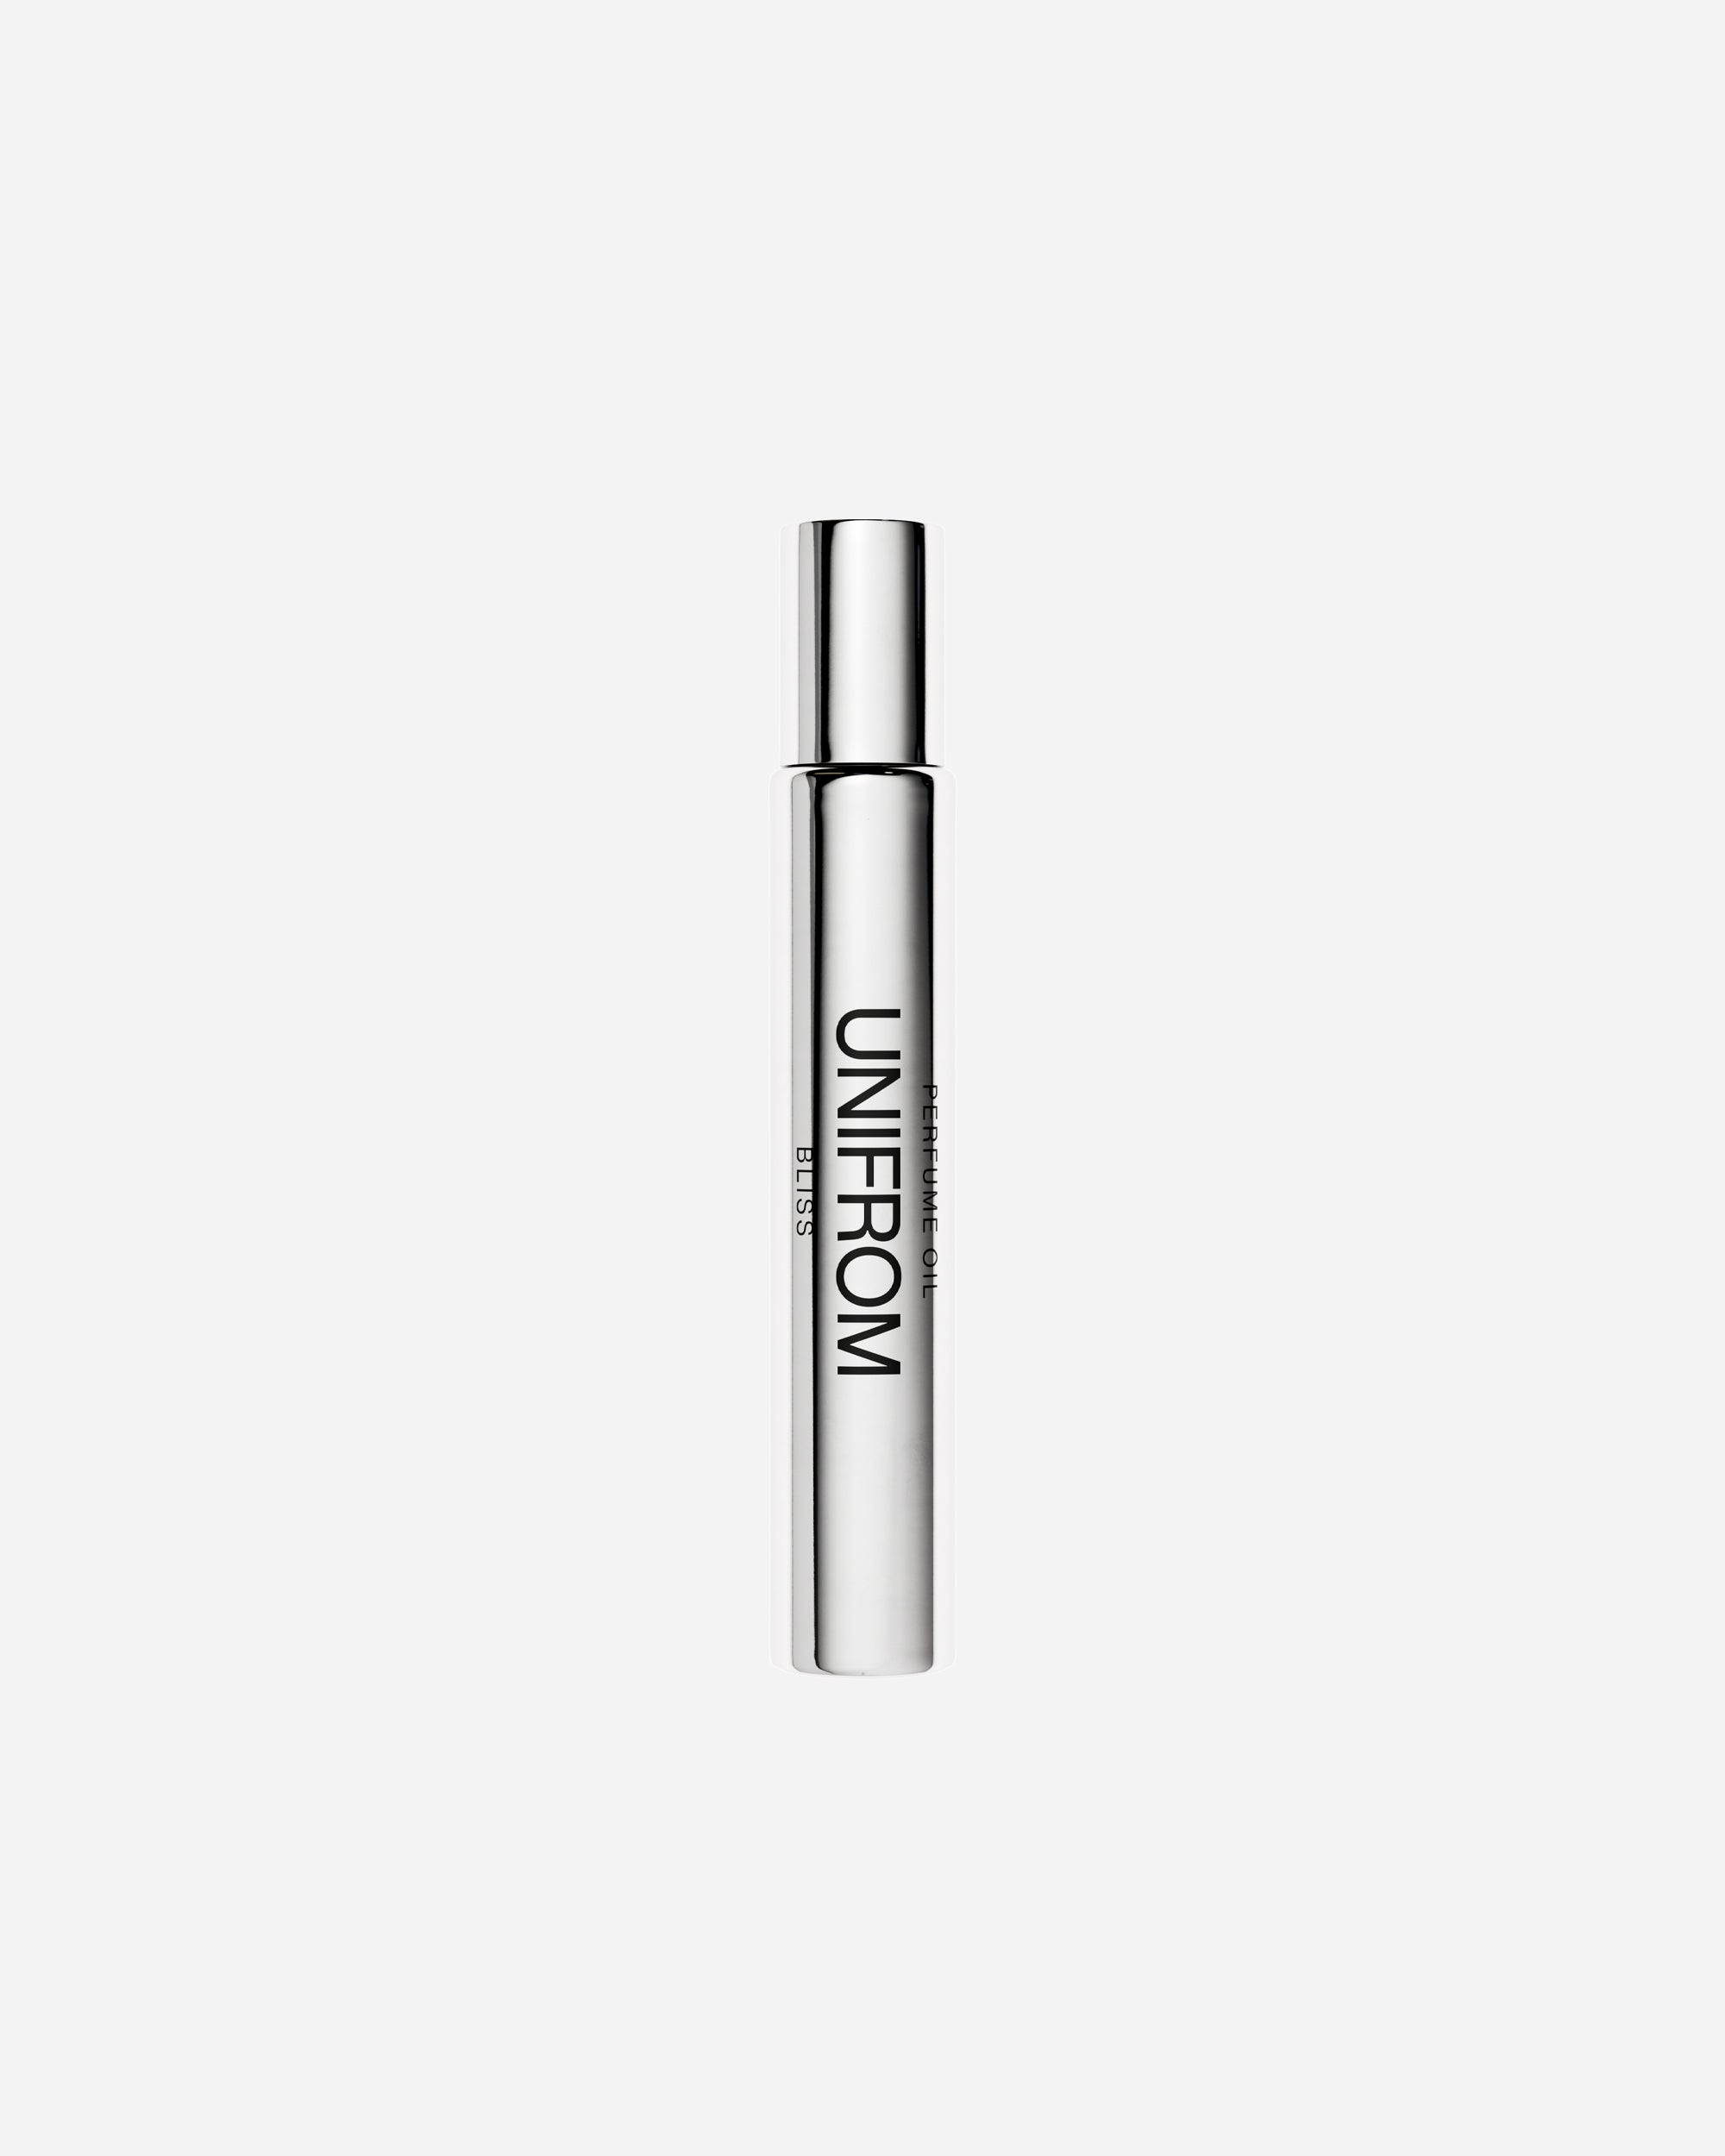 UNIFROM Bliss Perfume Oil  UNIFROM-18